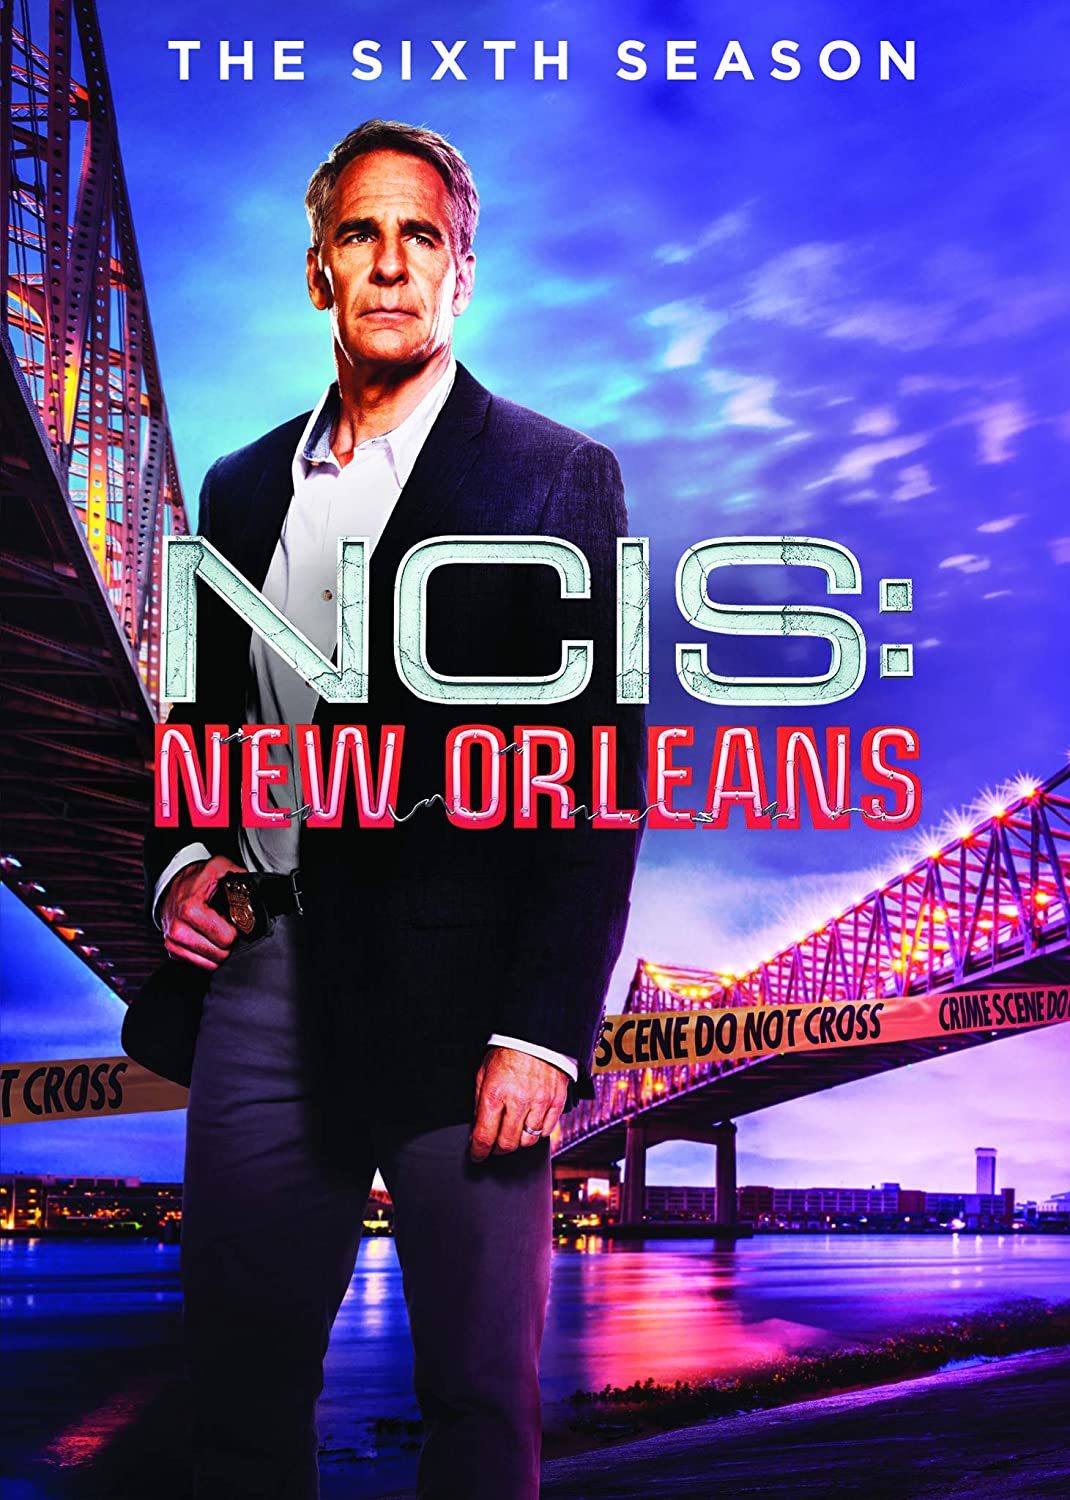 NCIS New Orleans Season 6 DVD Paramount Home Entertainment DVDs & Blu-ray Discs